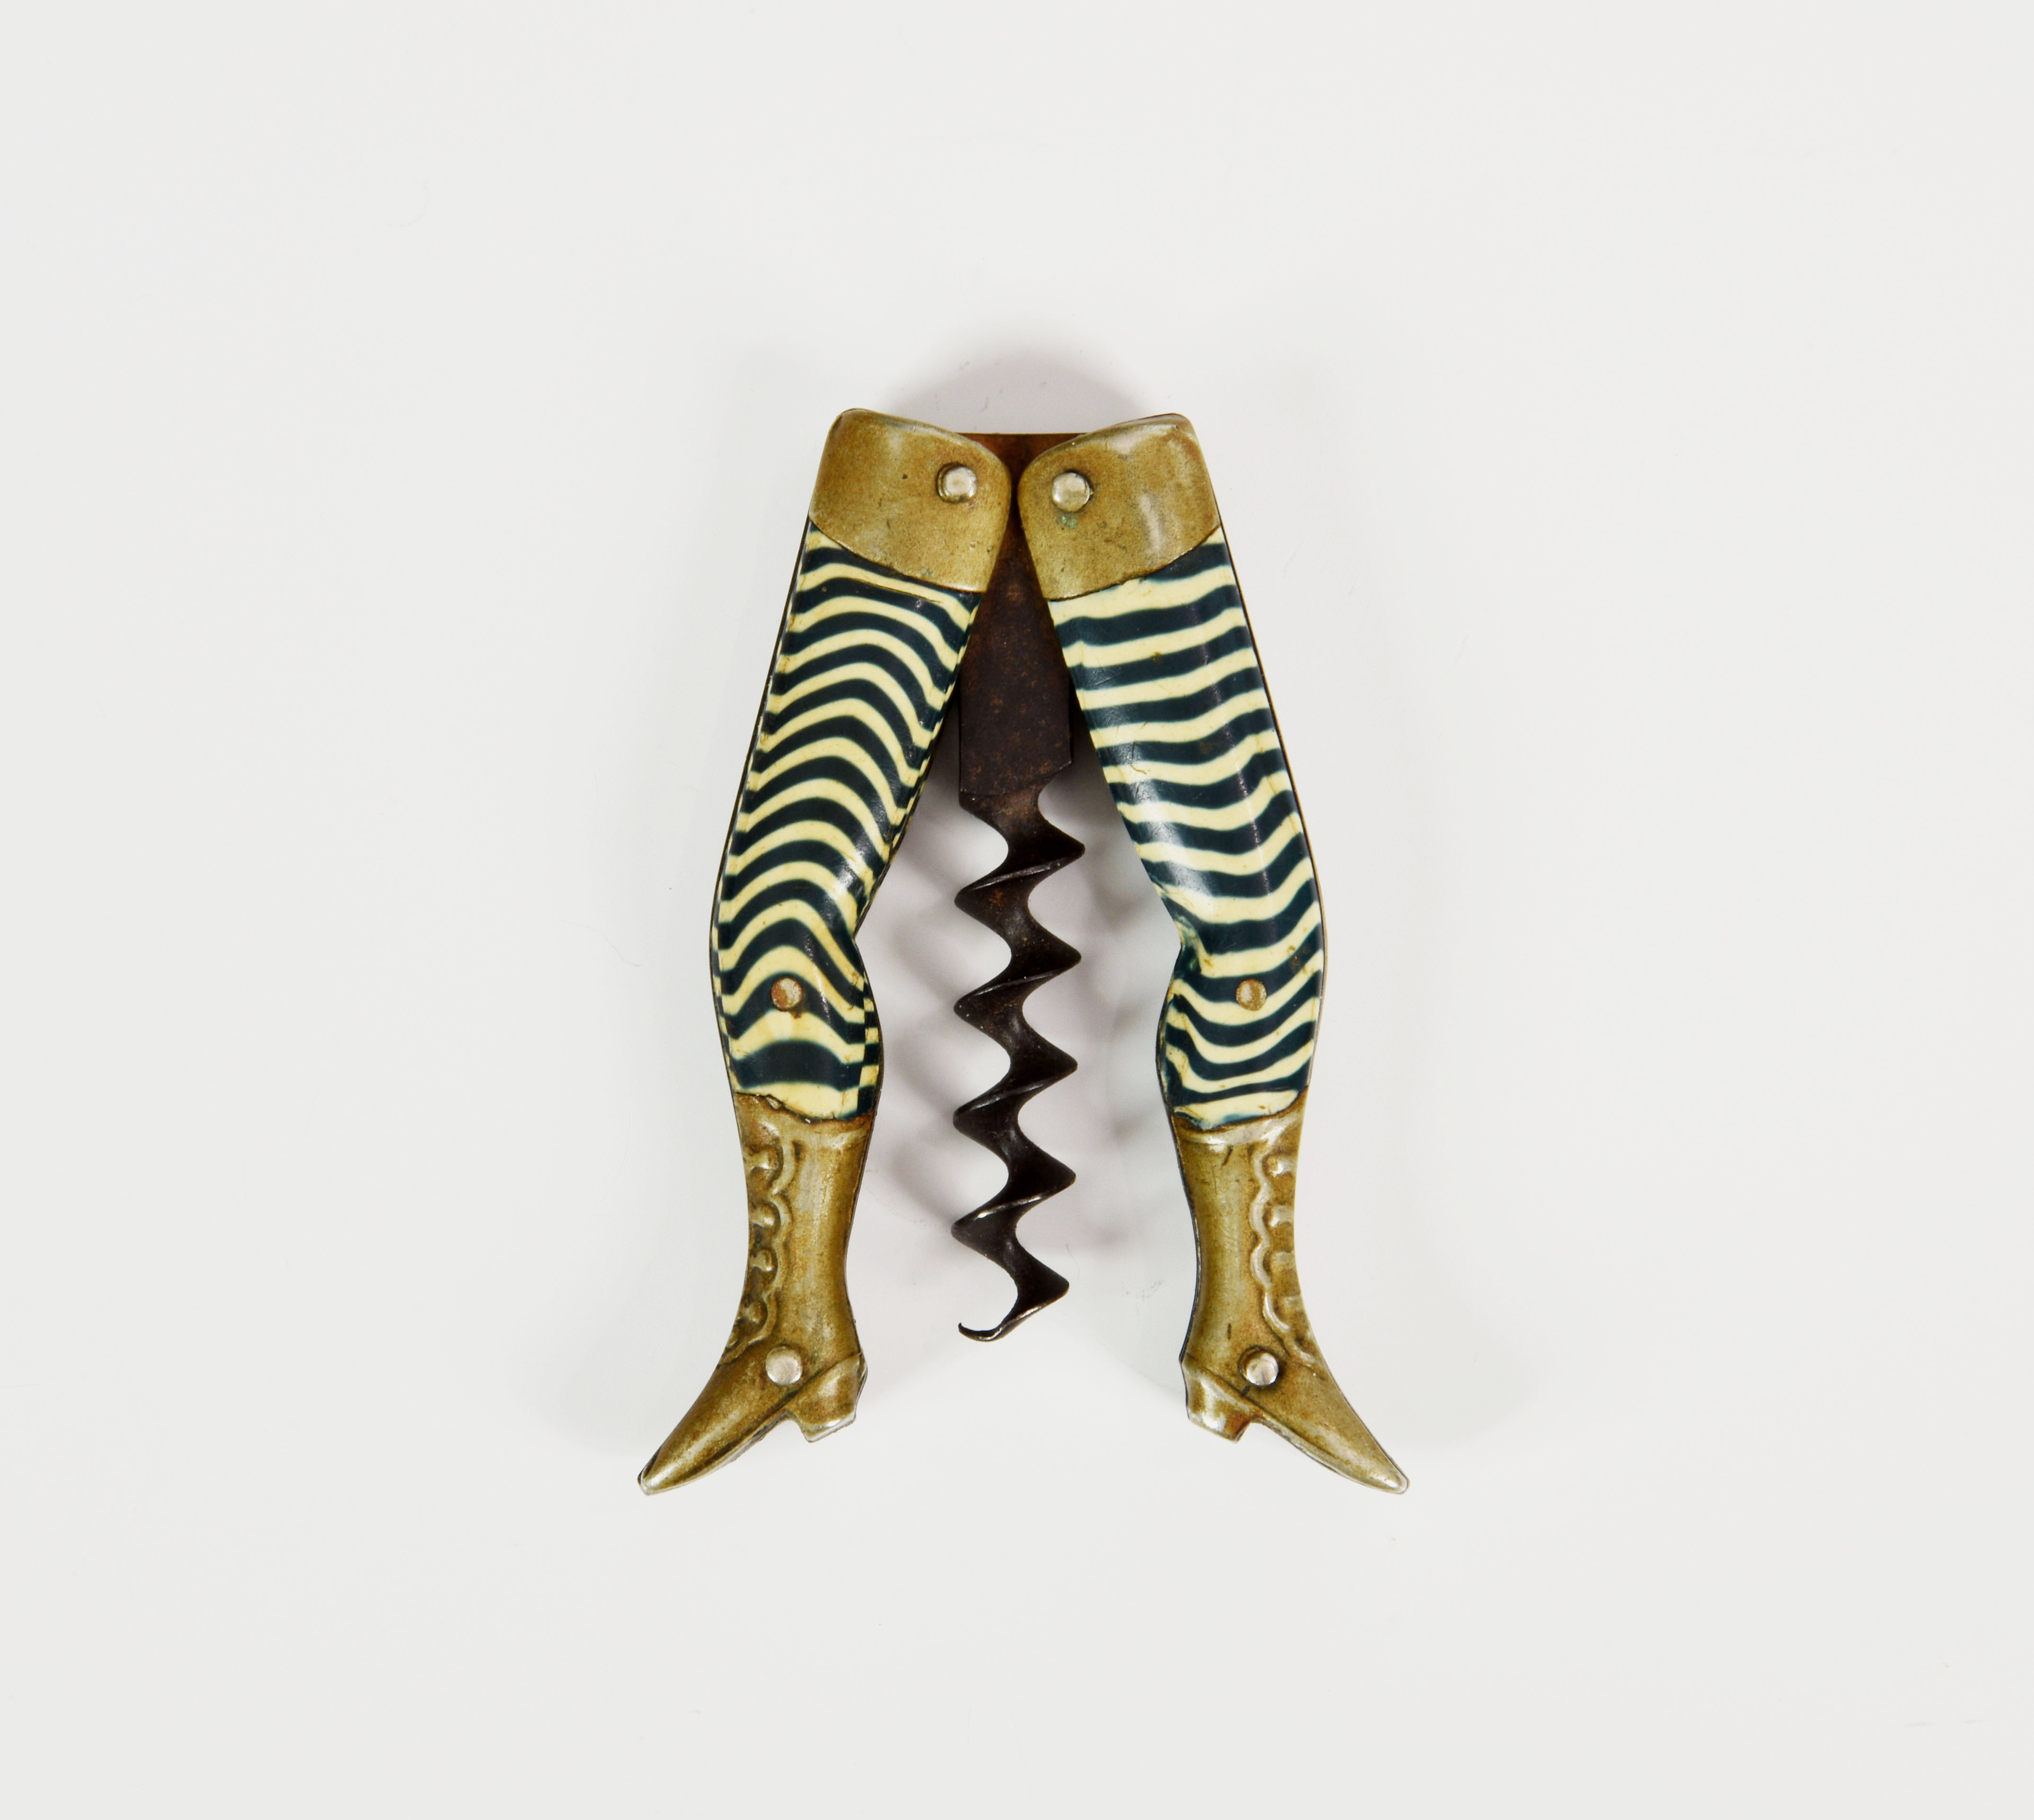 A corkscrew modelled as a pair of Victorian lady's legs in striped pantaloons, German, maker